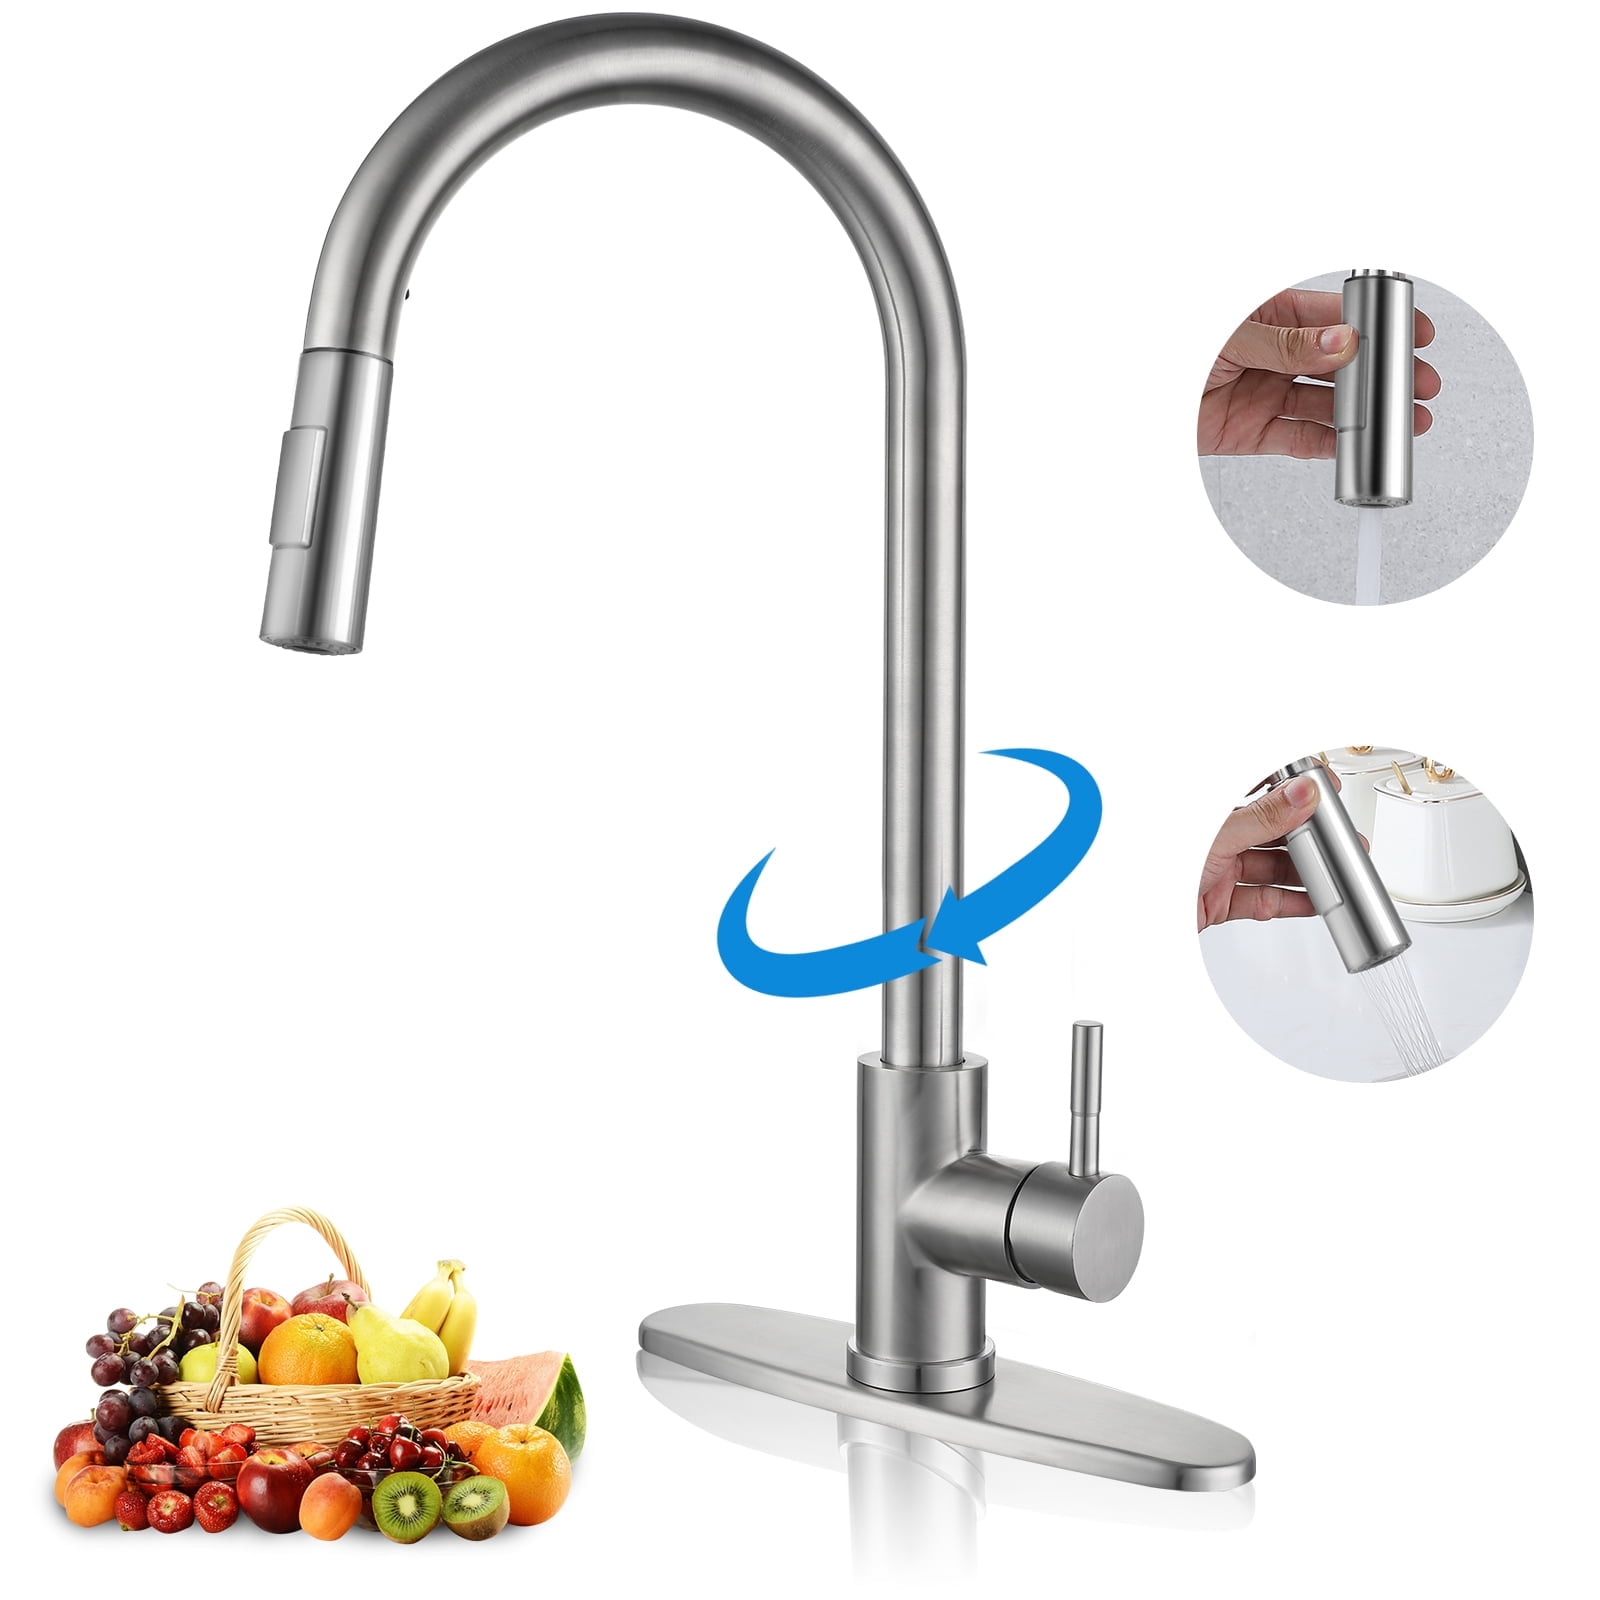 How to clean stainless steel faucets?